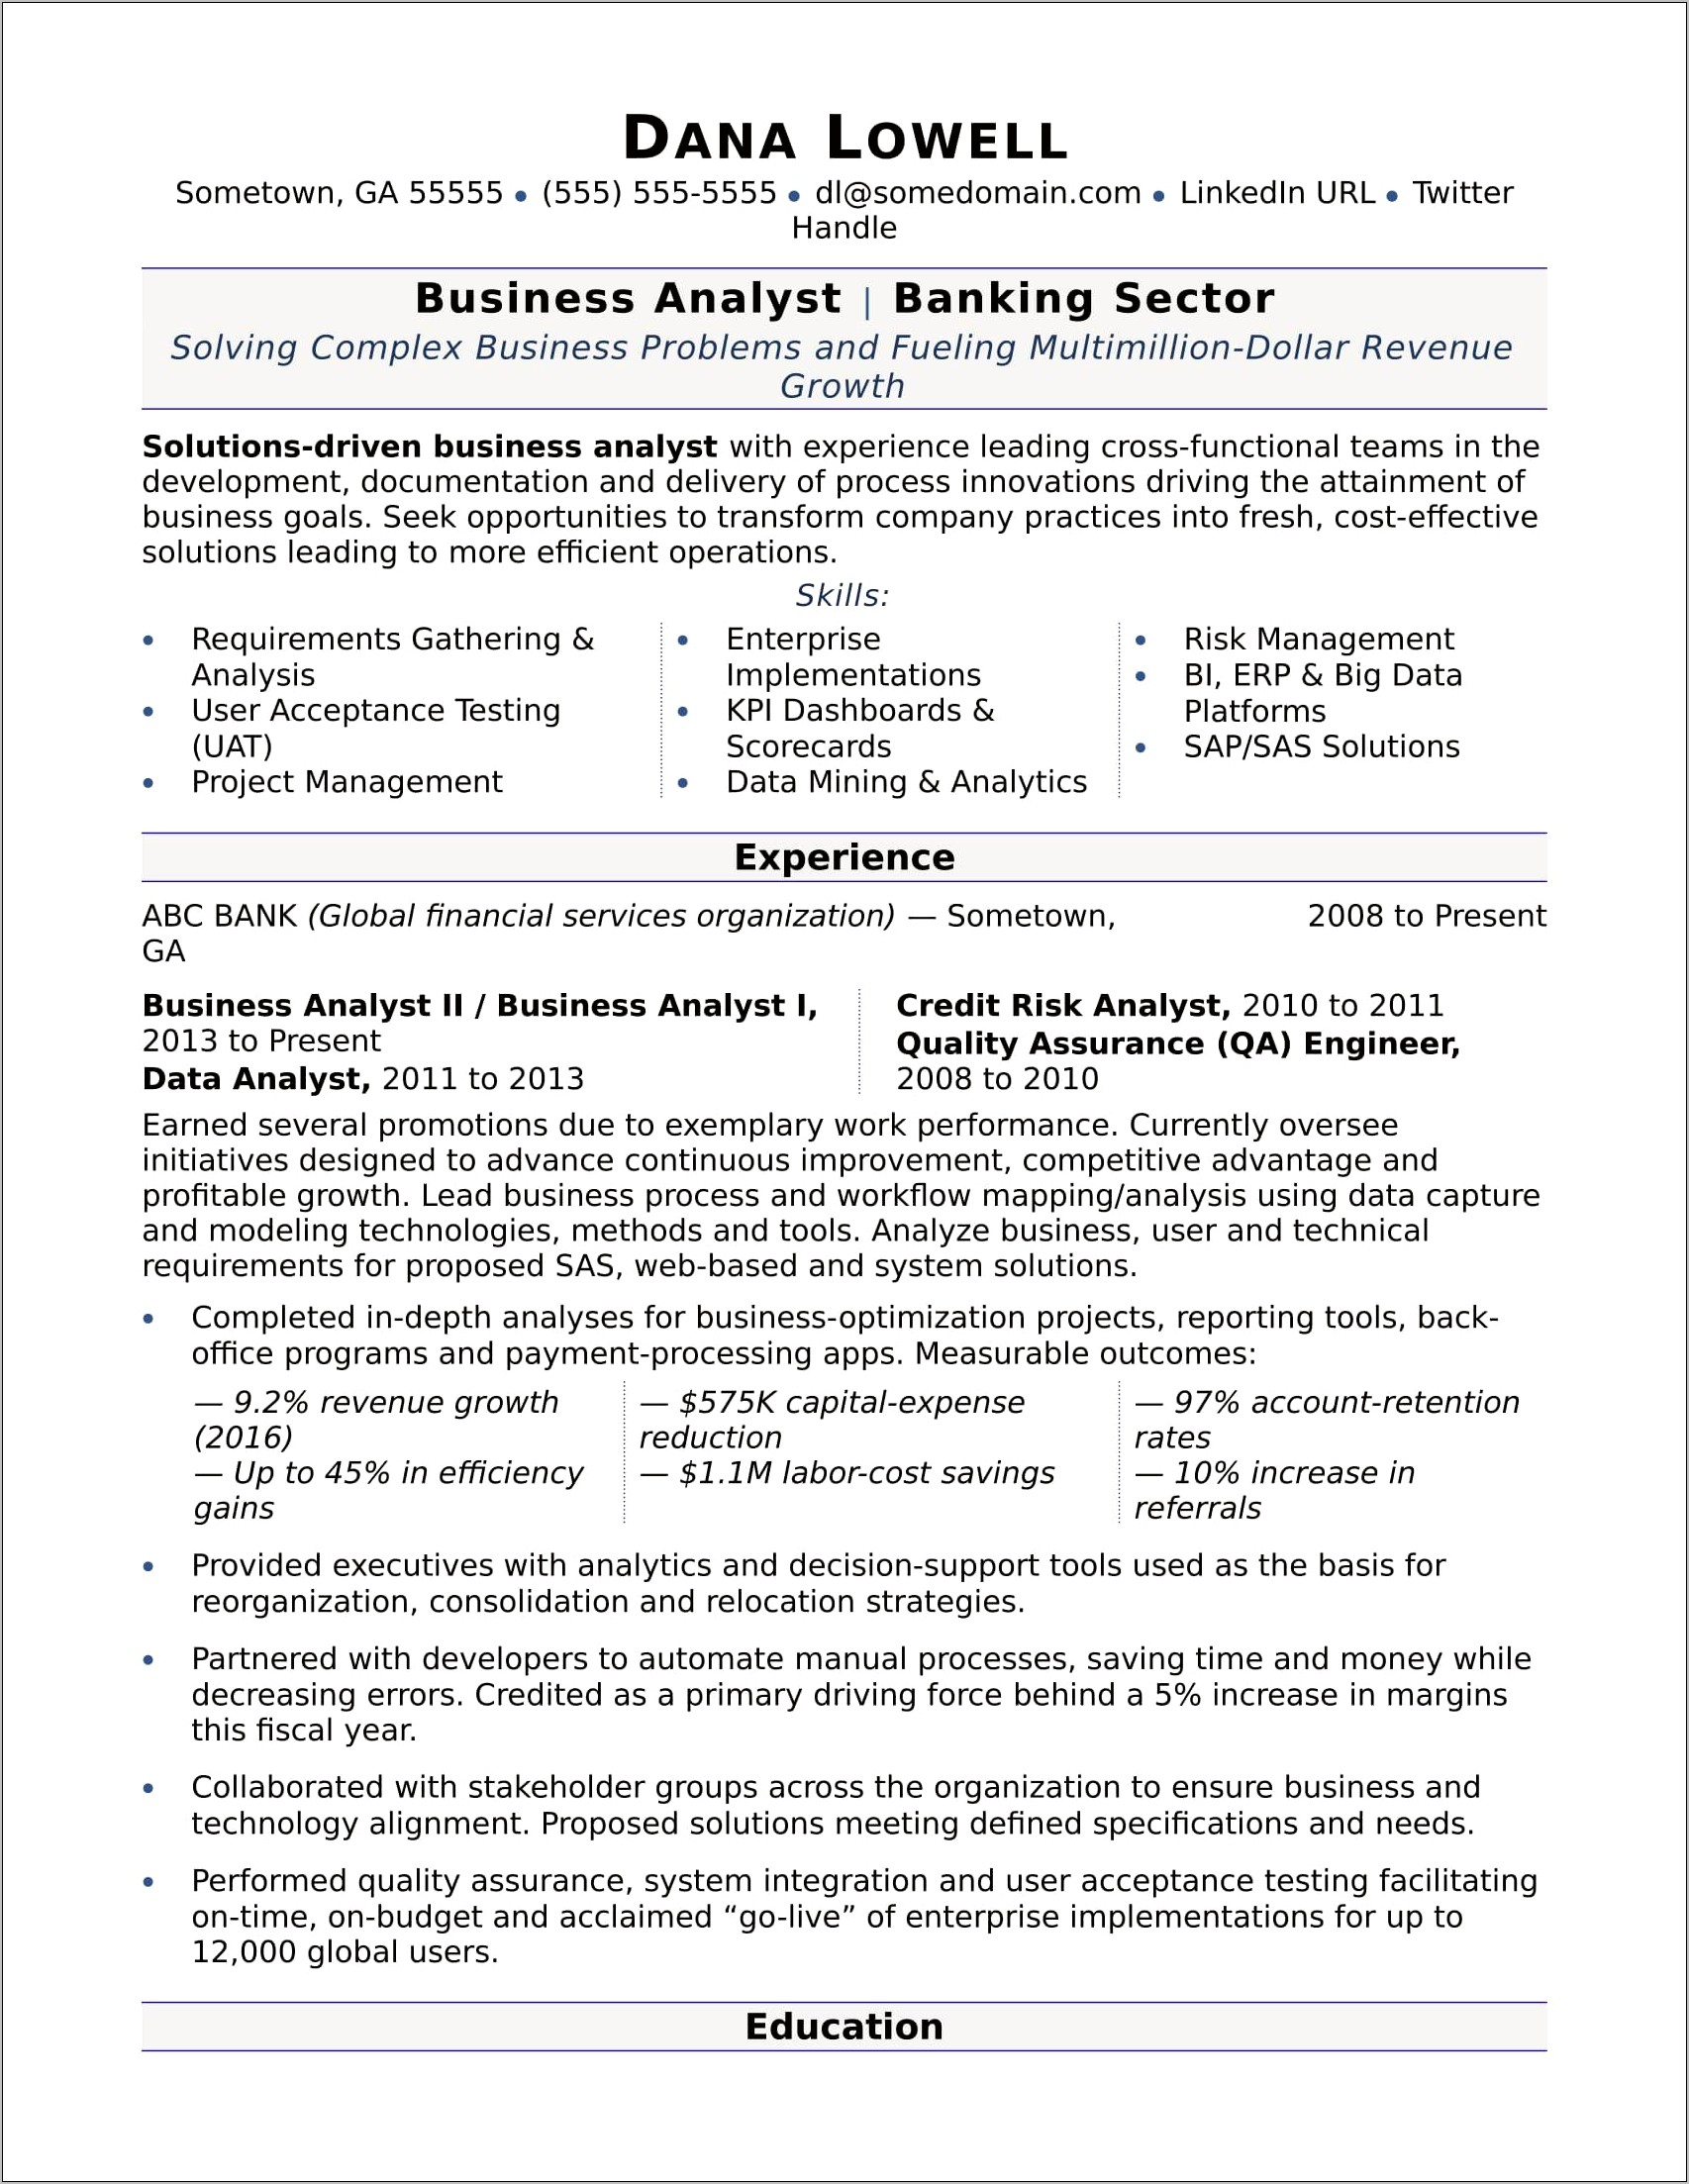 Sample Resume With Business Experience